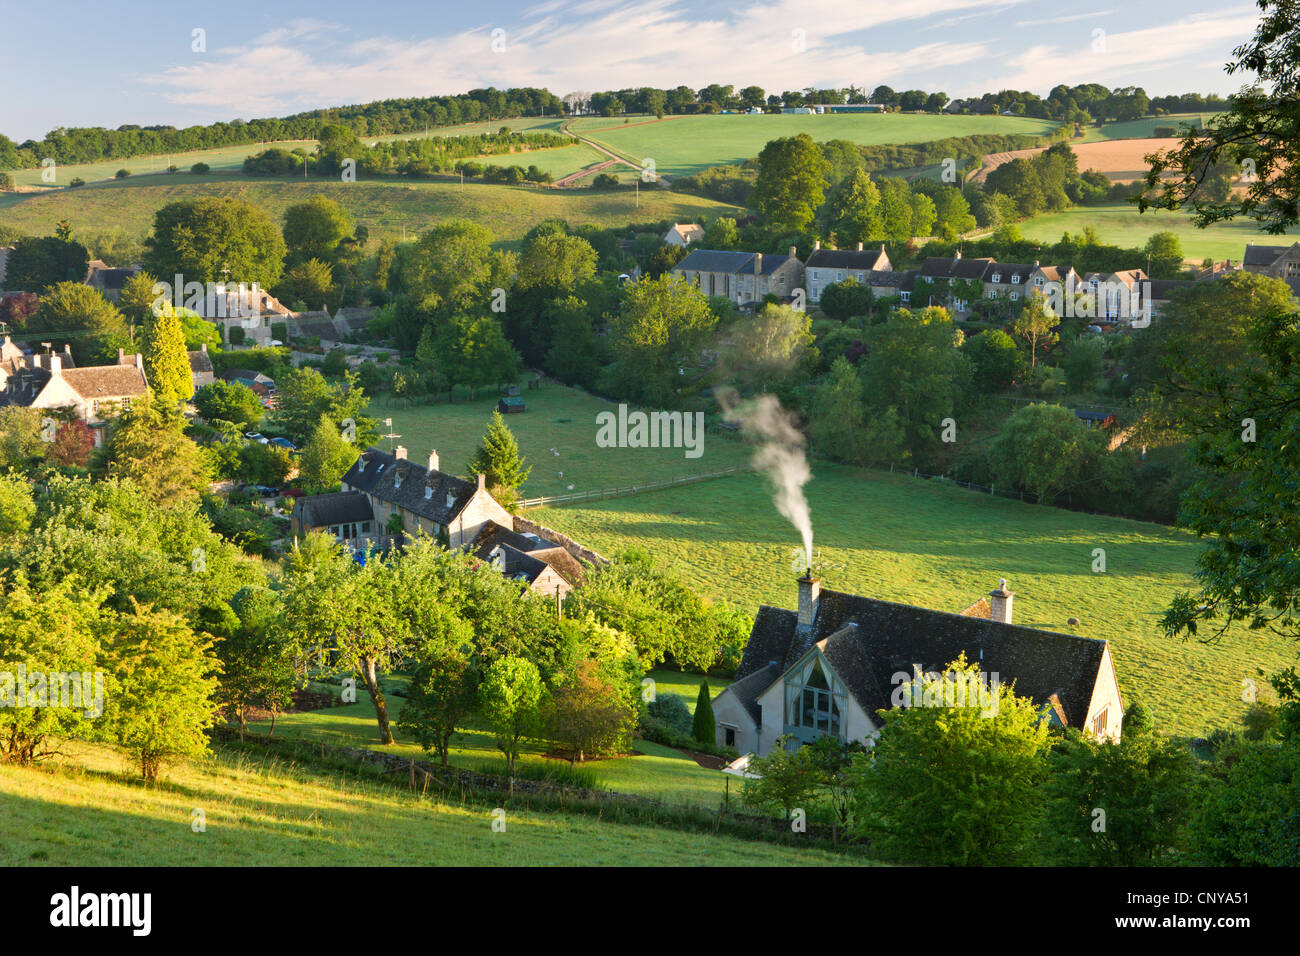 Cottages nestled into the valley in the picturesque Cotswolds village of Naunton, Gloucestershire, England. Summer (July) 2010. Stock Photo